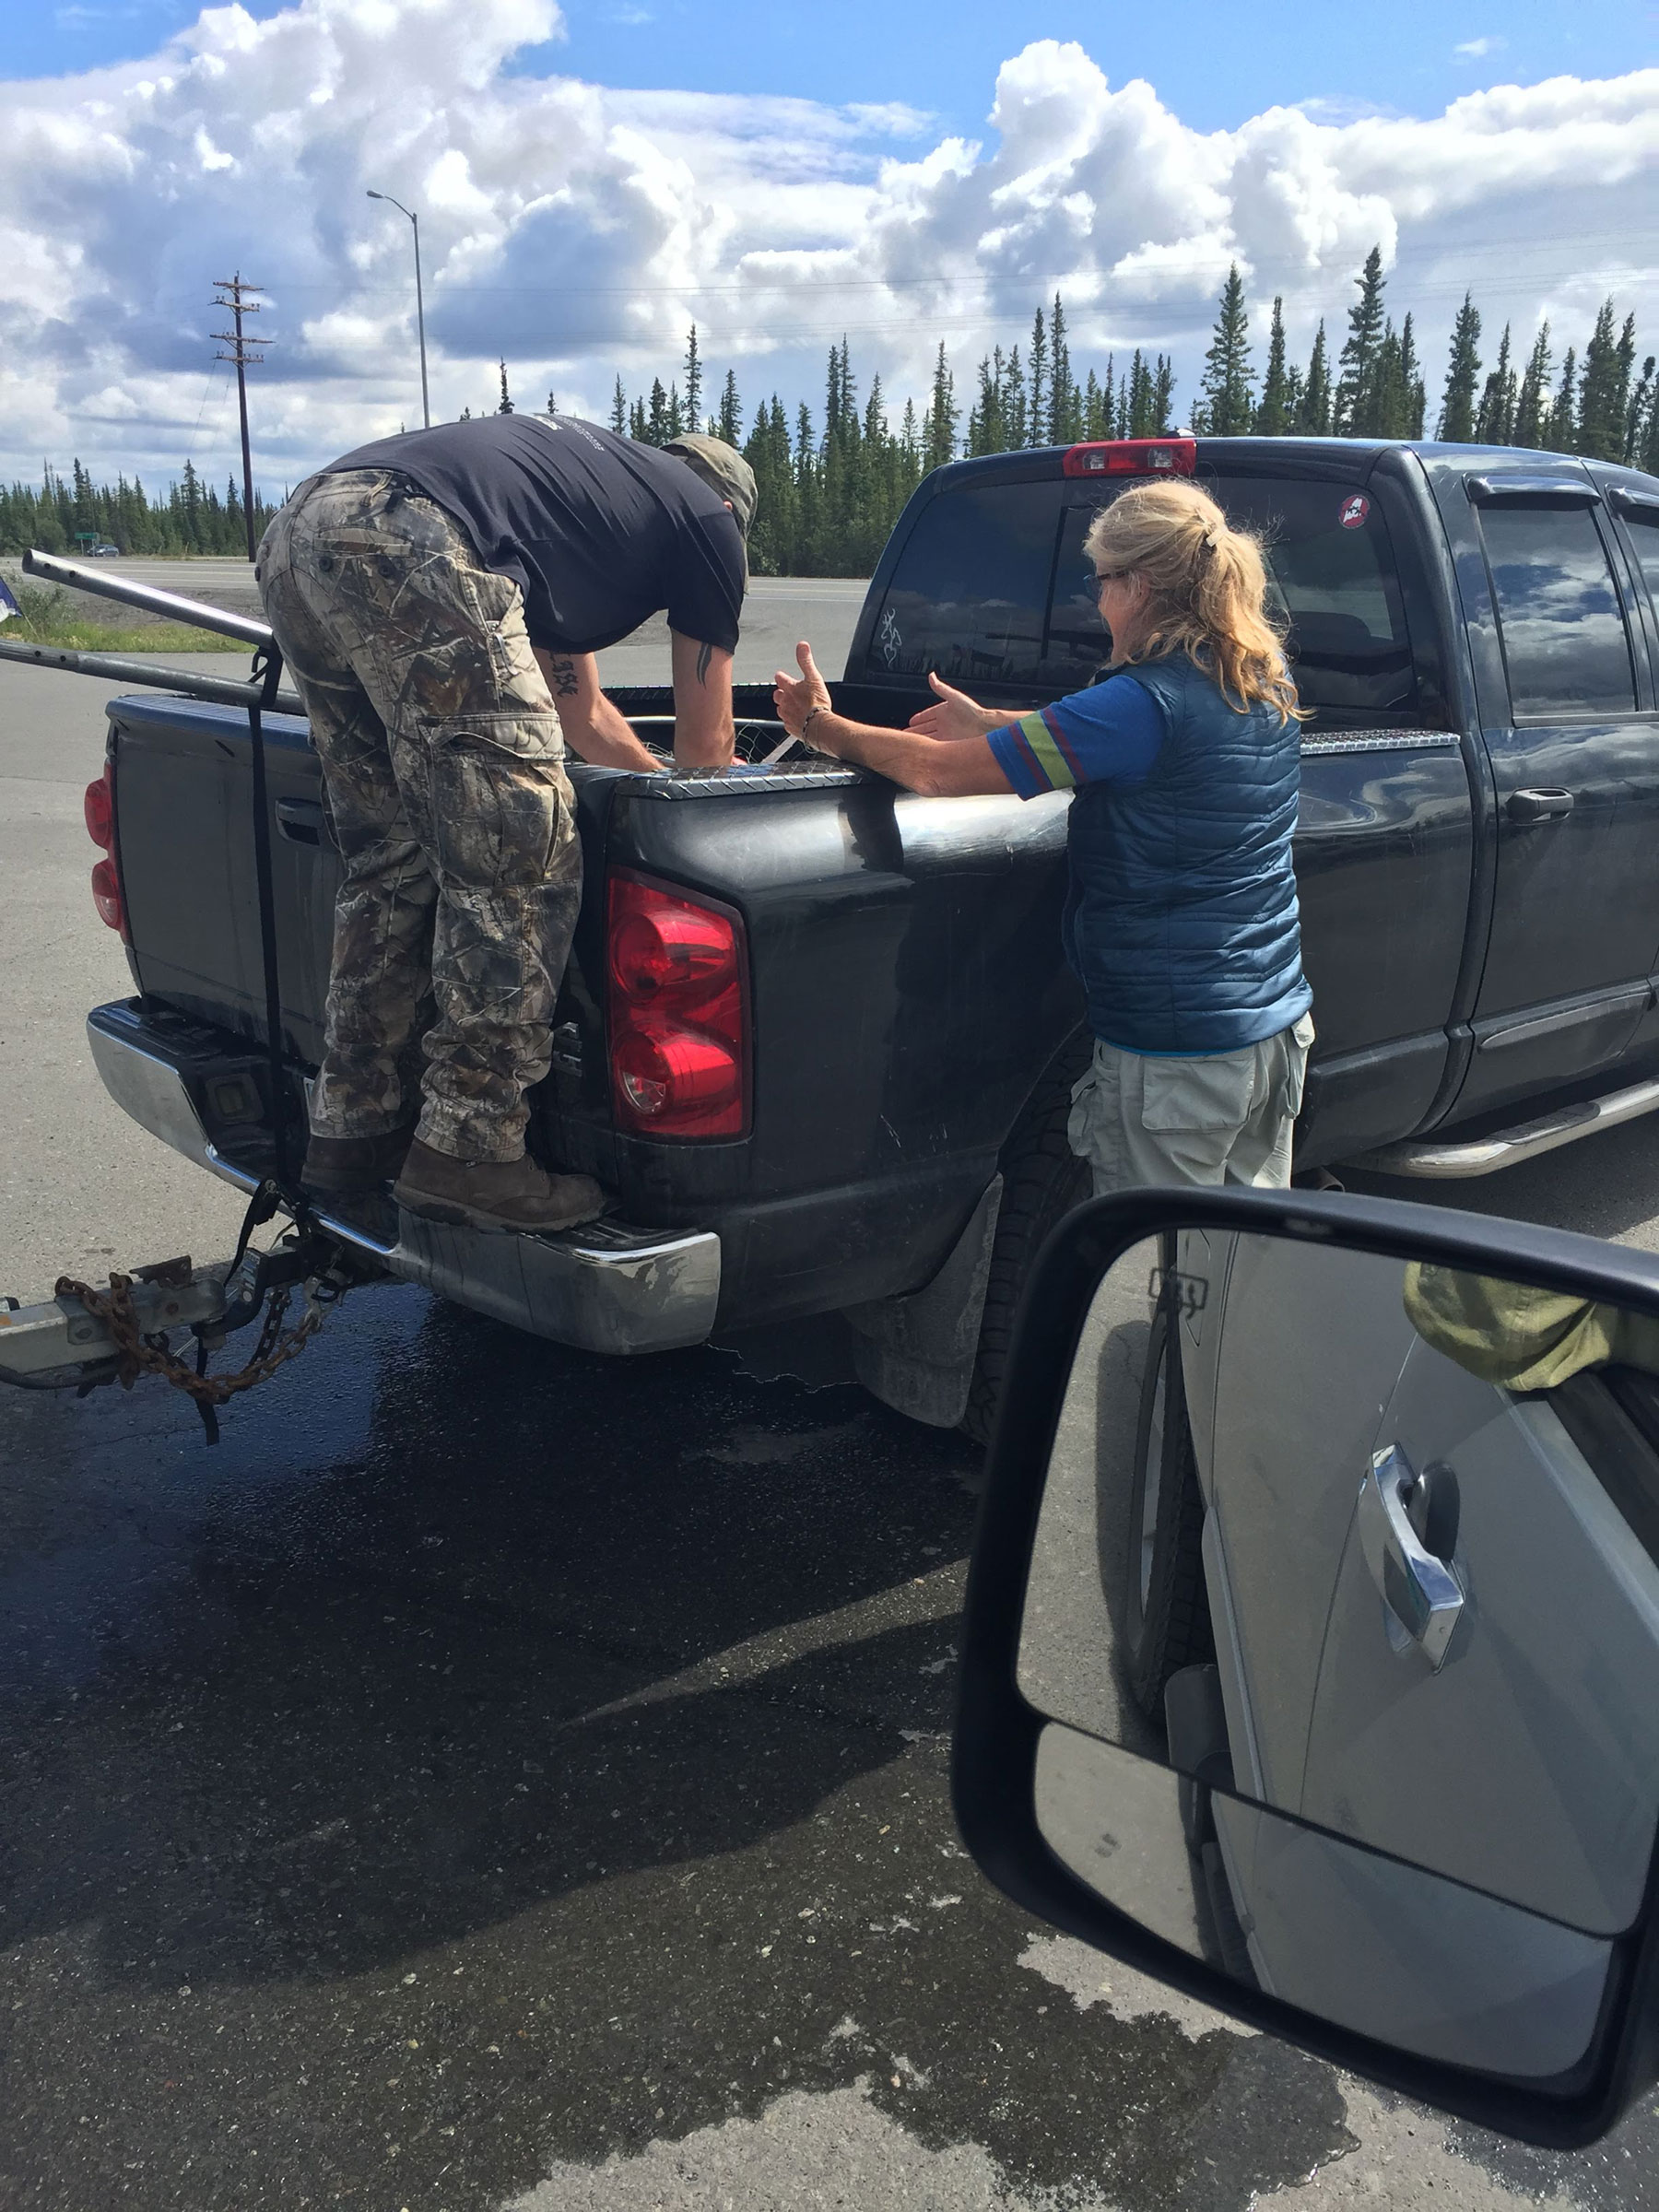 unpacking our truck with the big Alaskan sky in the background